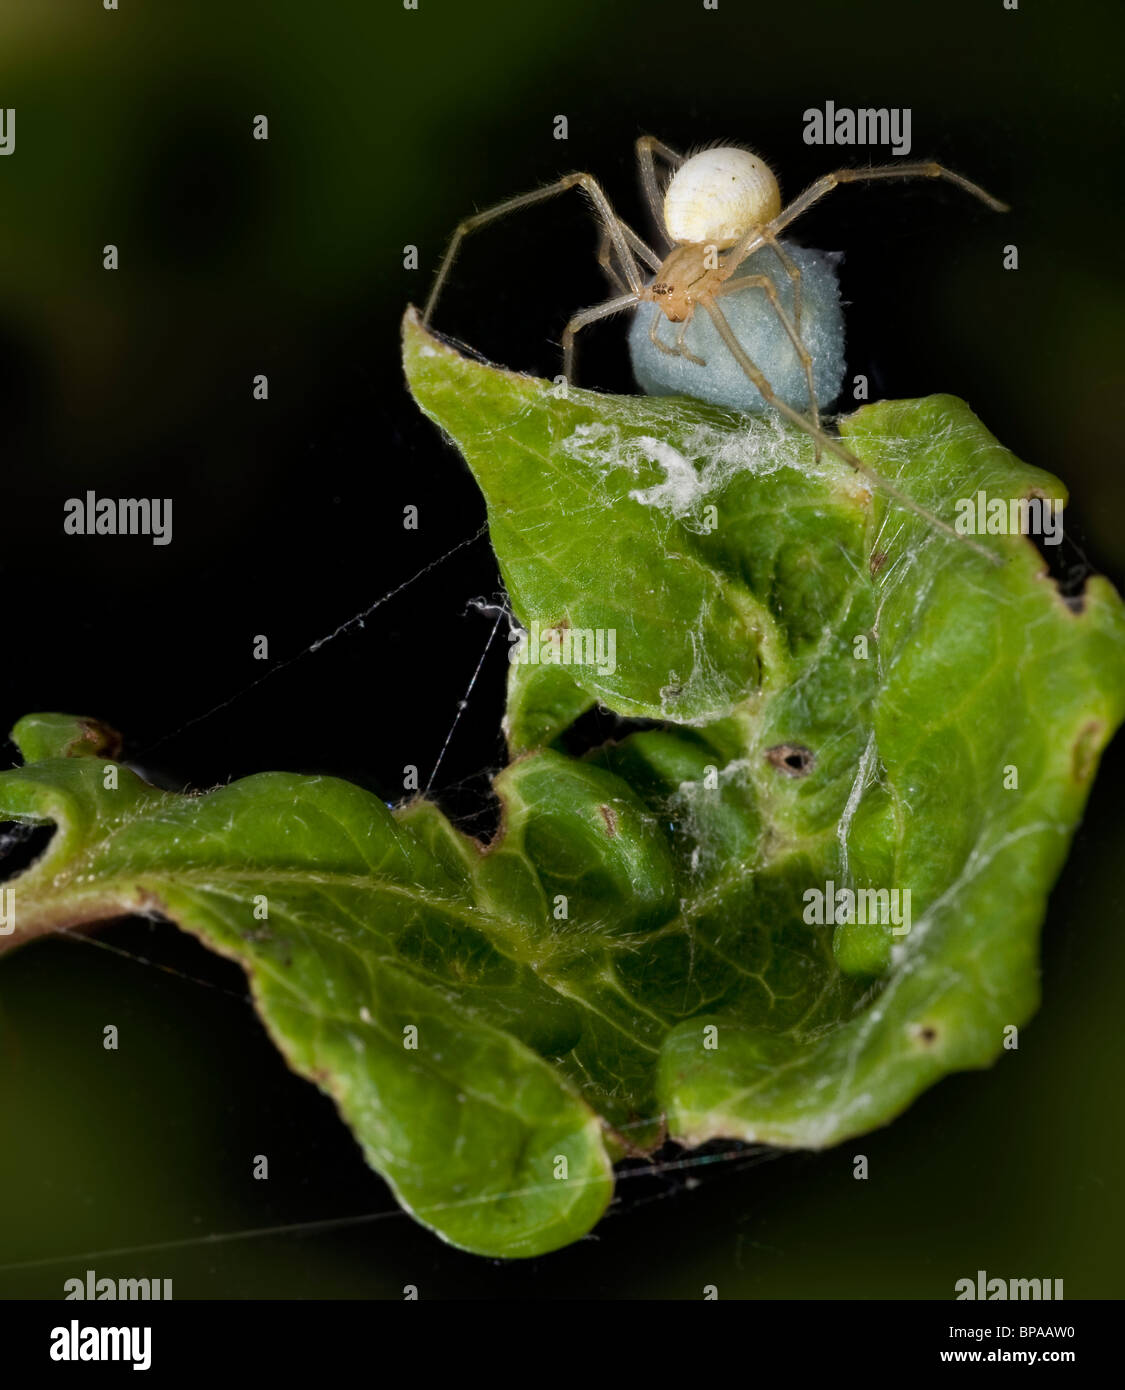 Female comb footed spider, Enoplognatha ovata,  tending its bluish egg sac which is concealed in a rolled up leaf, Stock Photo